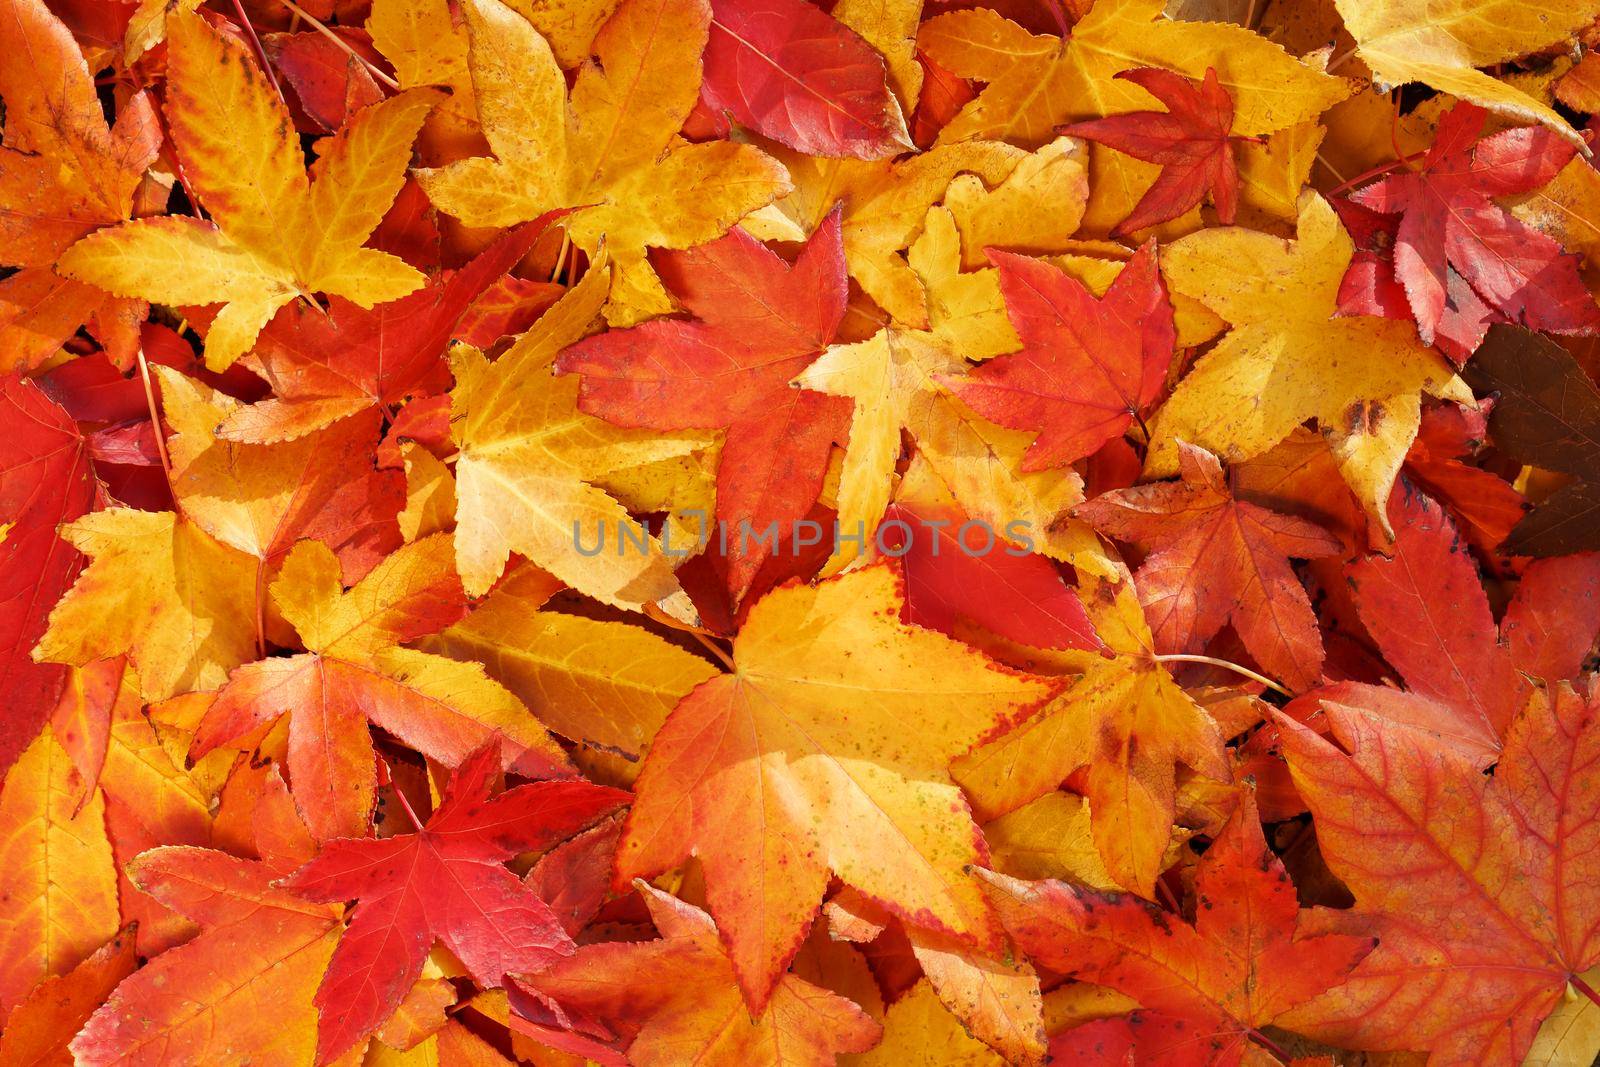 Bright, warm autumn foliage of yellow color on the earth in sunny weather. Warm autumn day texture, backgroundAutumn foliage, old orange maple leaves, dry foliage of trees, soft focus, autumn season, nature change, bright soft sunlight